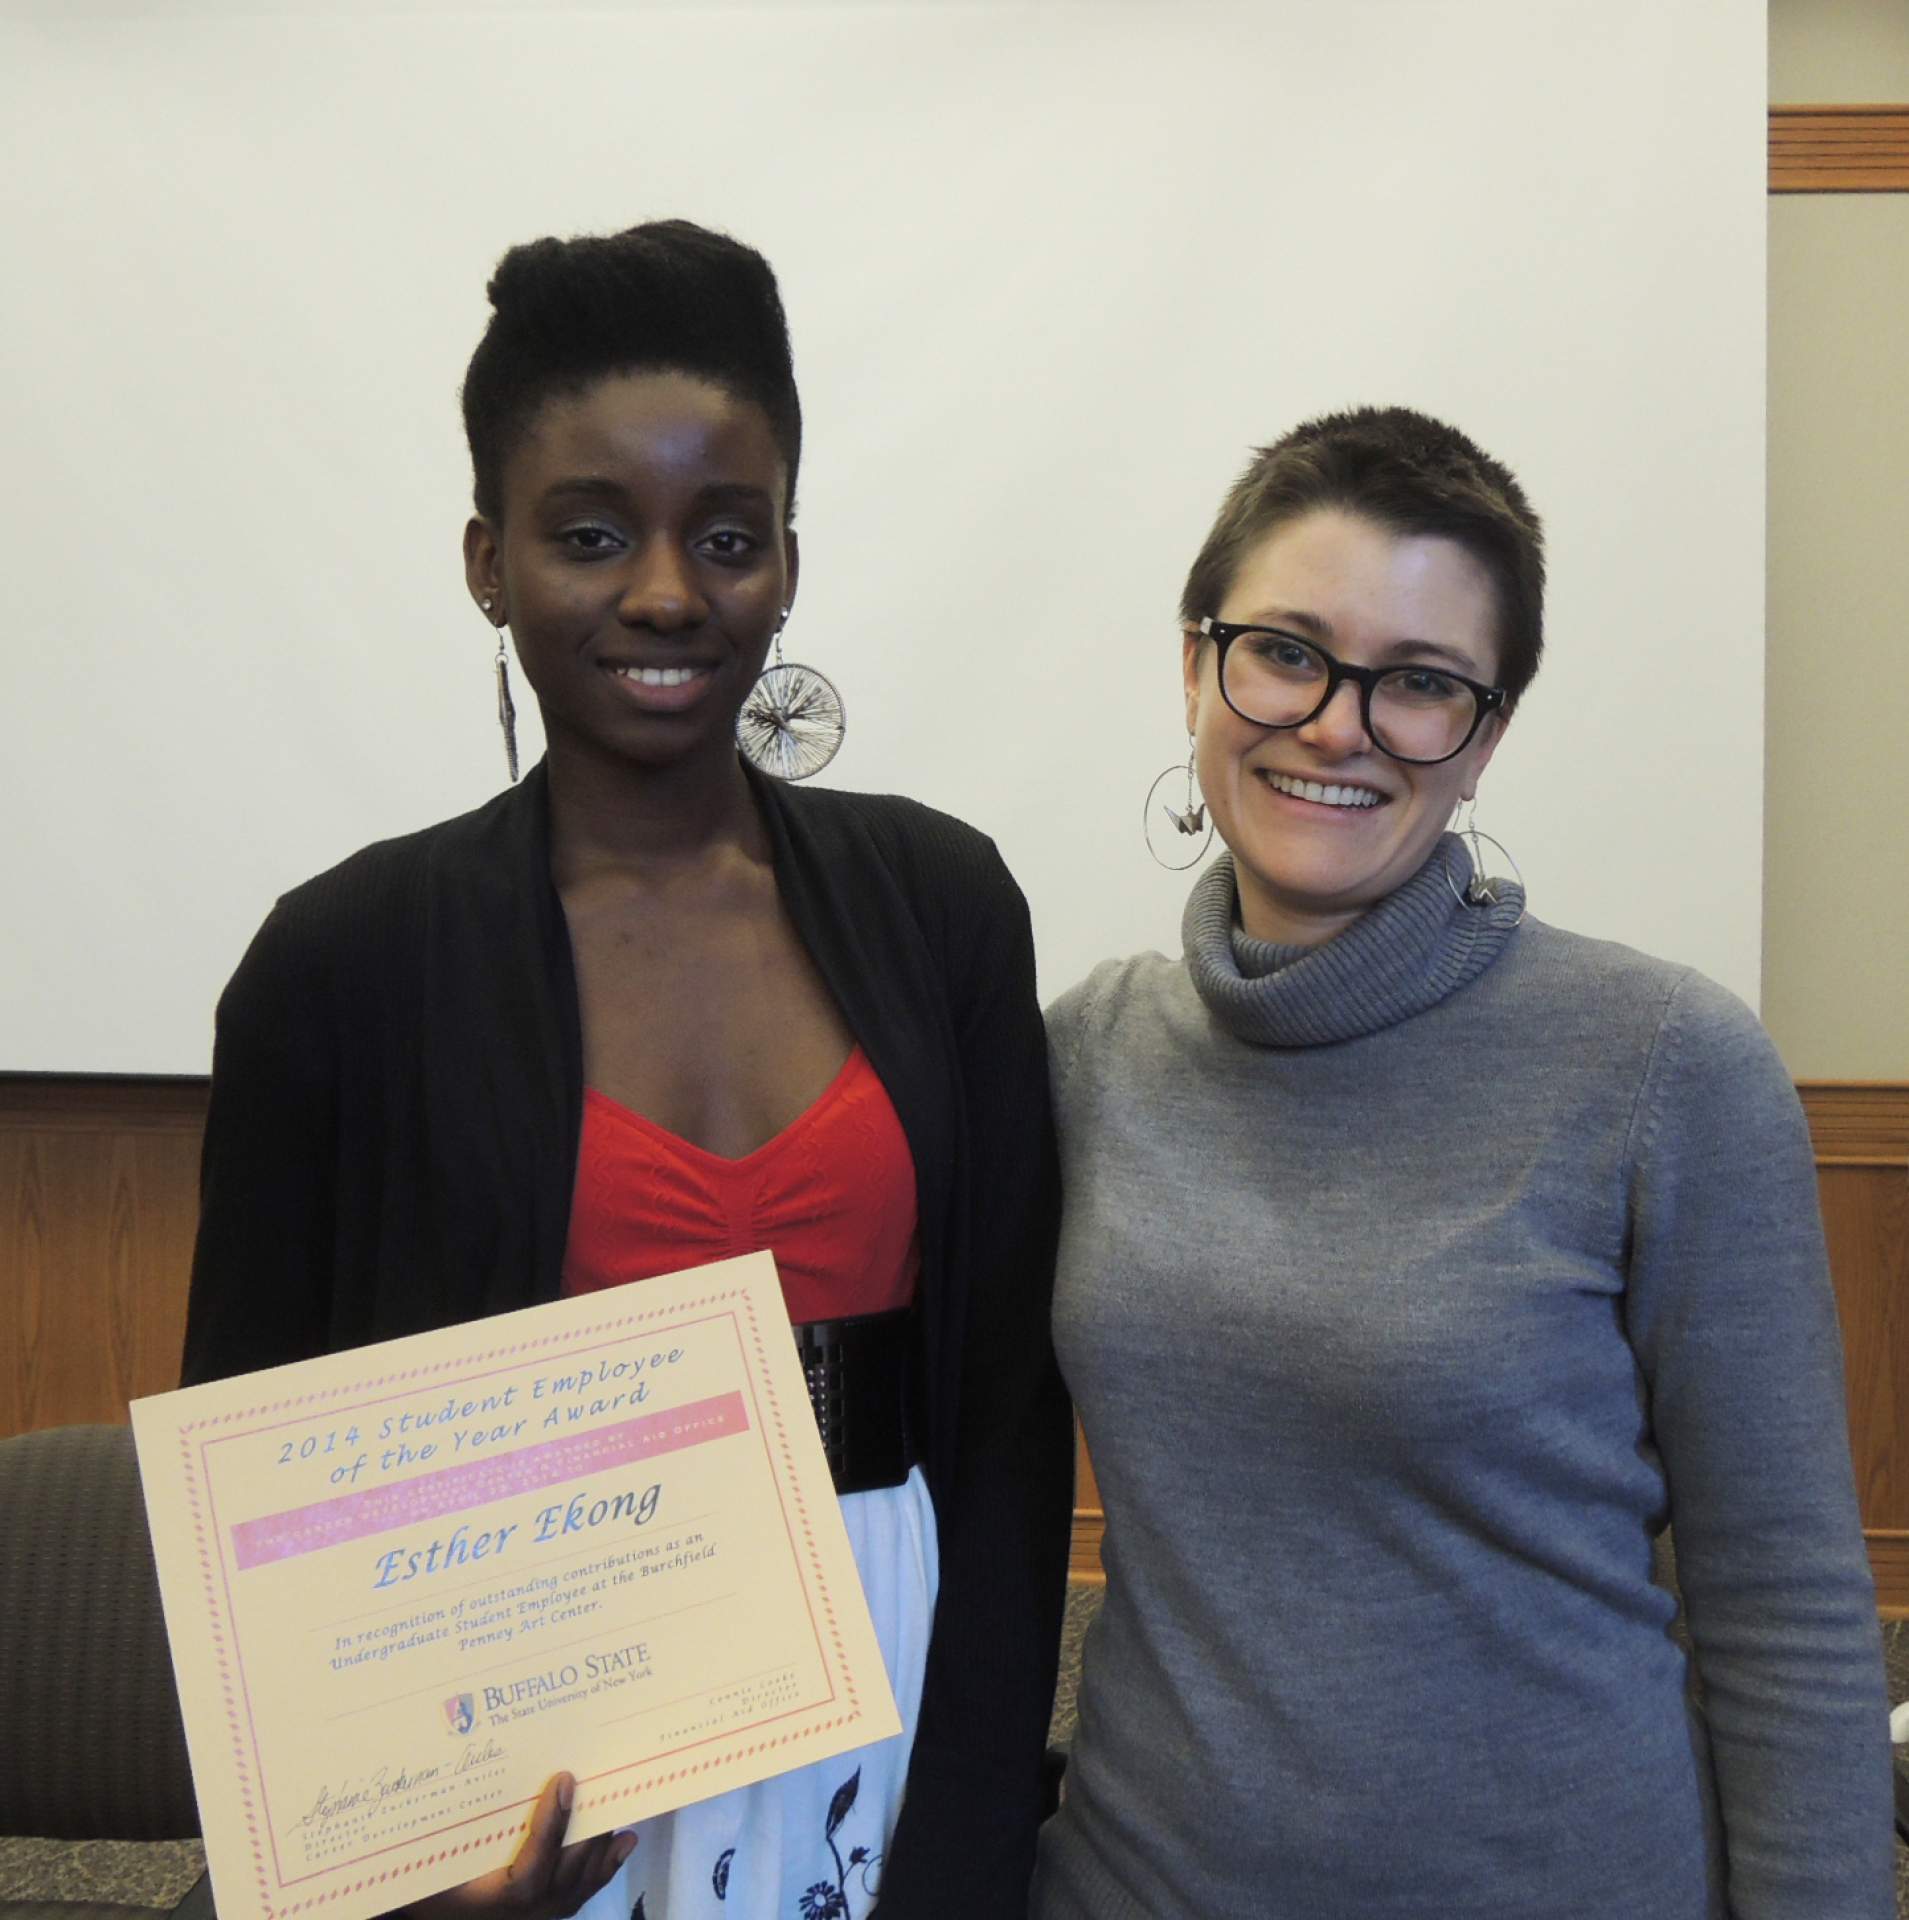 Esther Ekong, Student Employee, and Heather Gring, Archivist, at the Burchfield Penney Art Center